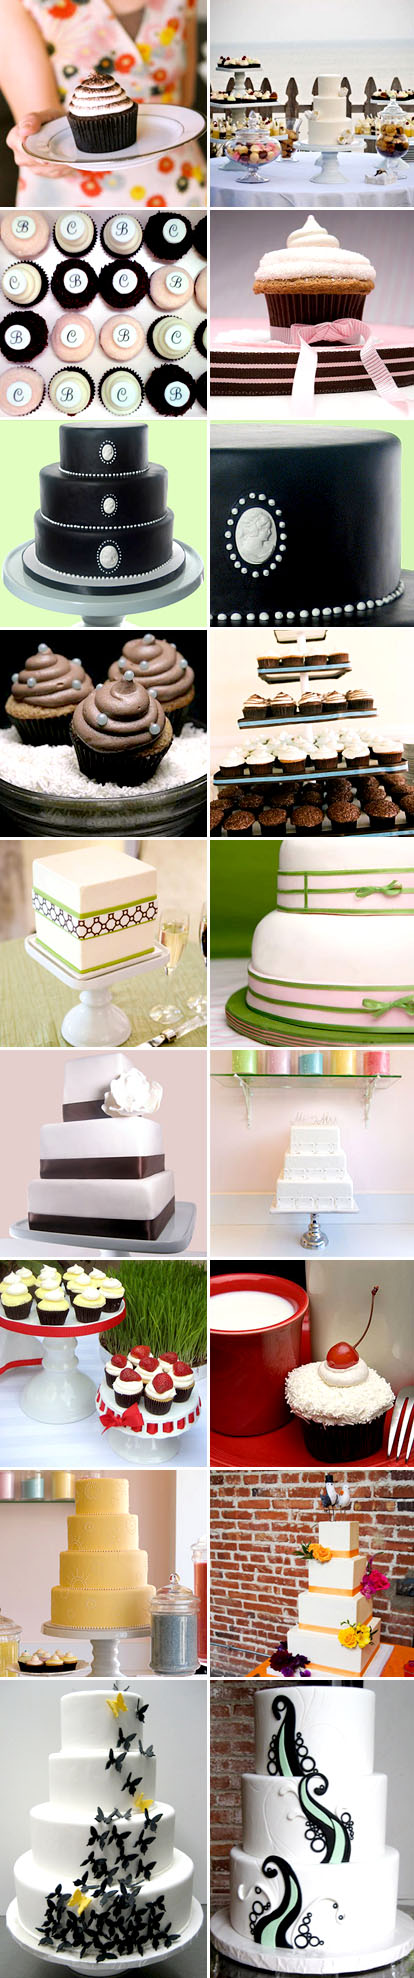 Images by the Vanilla Bake Shop, custom wedding cakes and cupcakes in Santa Monica, California